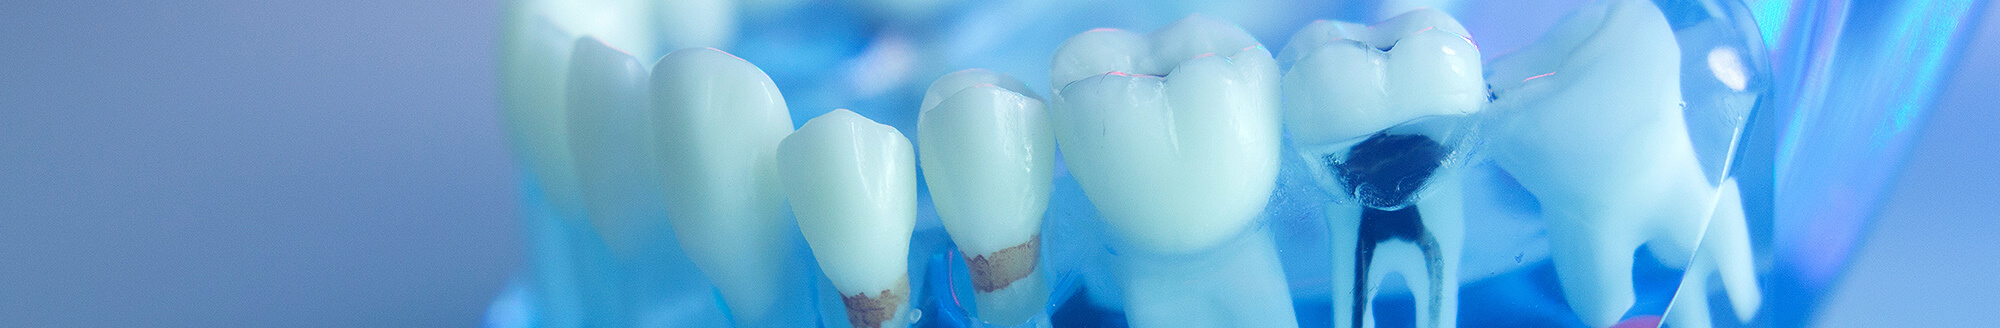 Root Canals for Severely Decayed Teeth - Waukesha & Milwaukee County